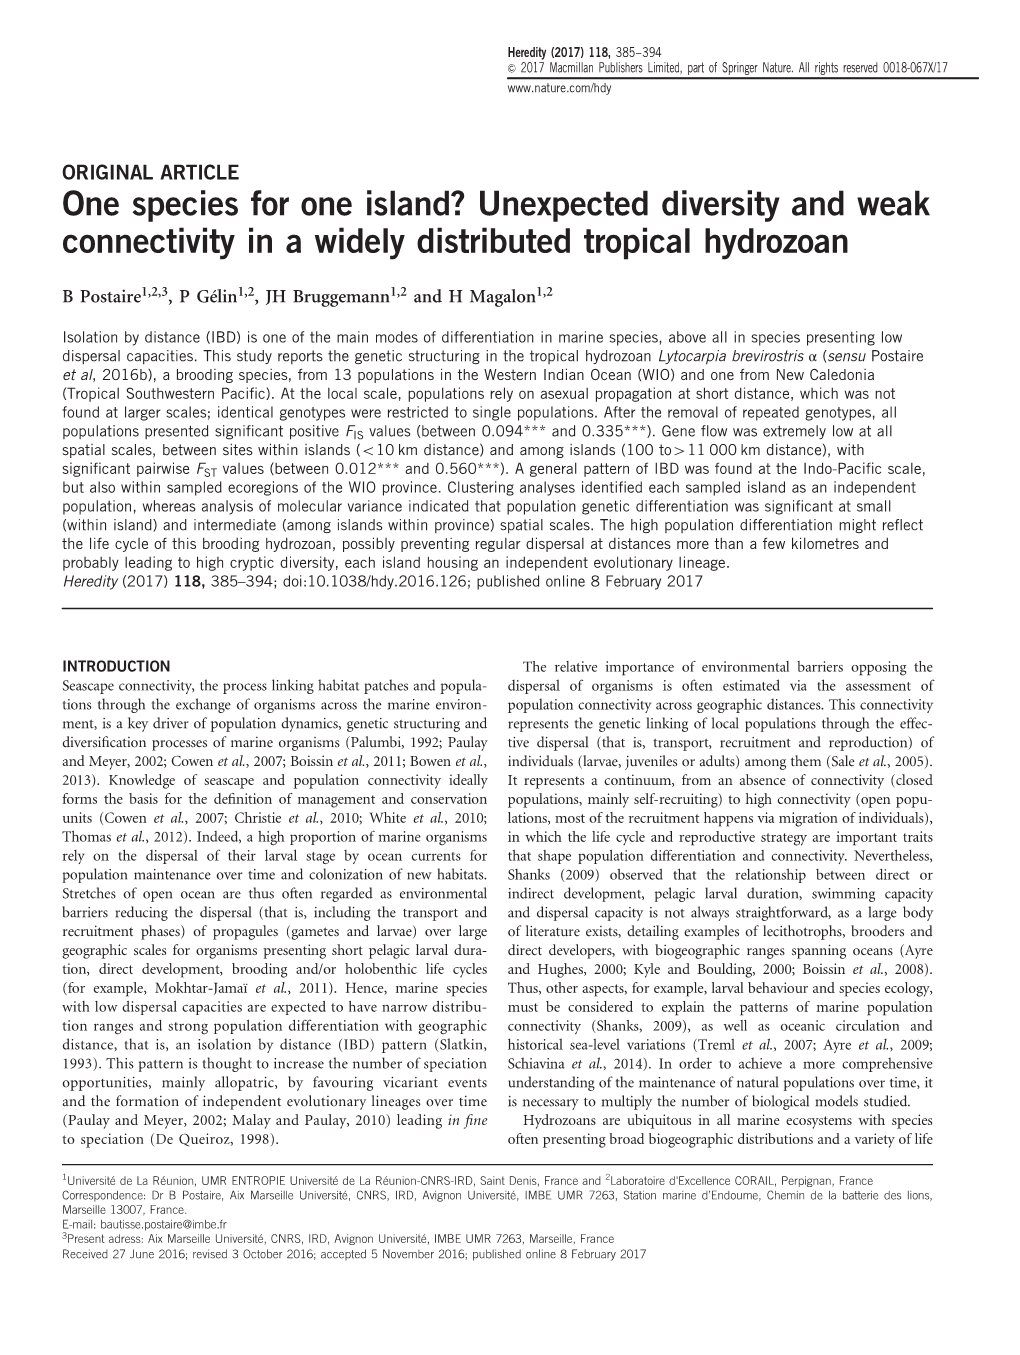 Unexpected Diversity and Weak Connectivity in a Widely Distributed Tropical Hydrozoan